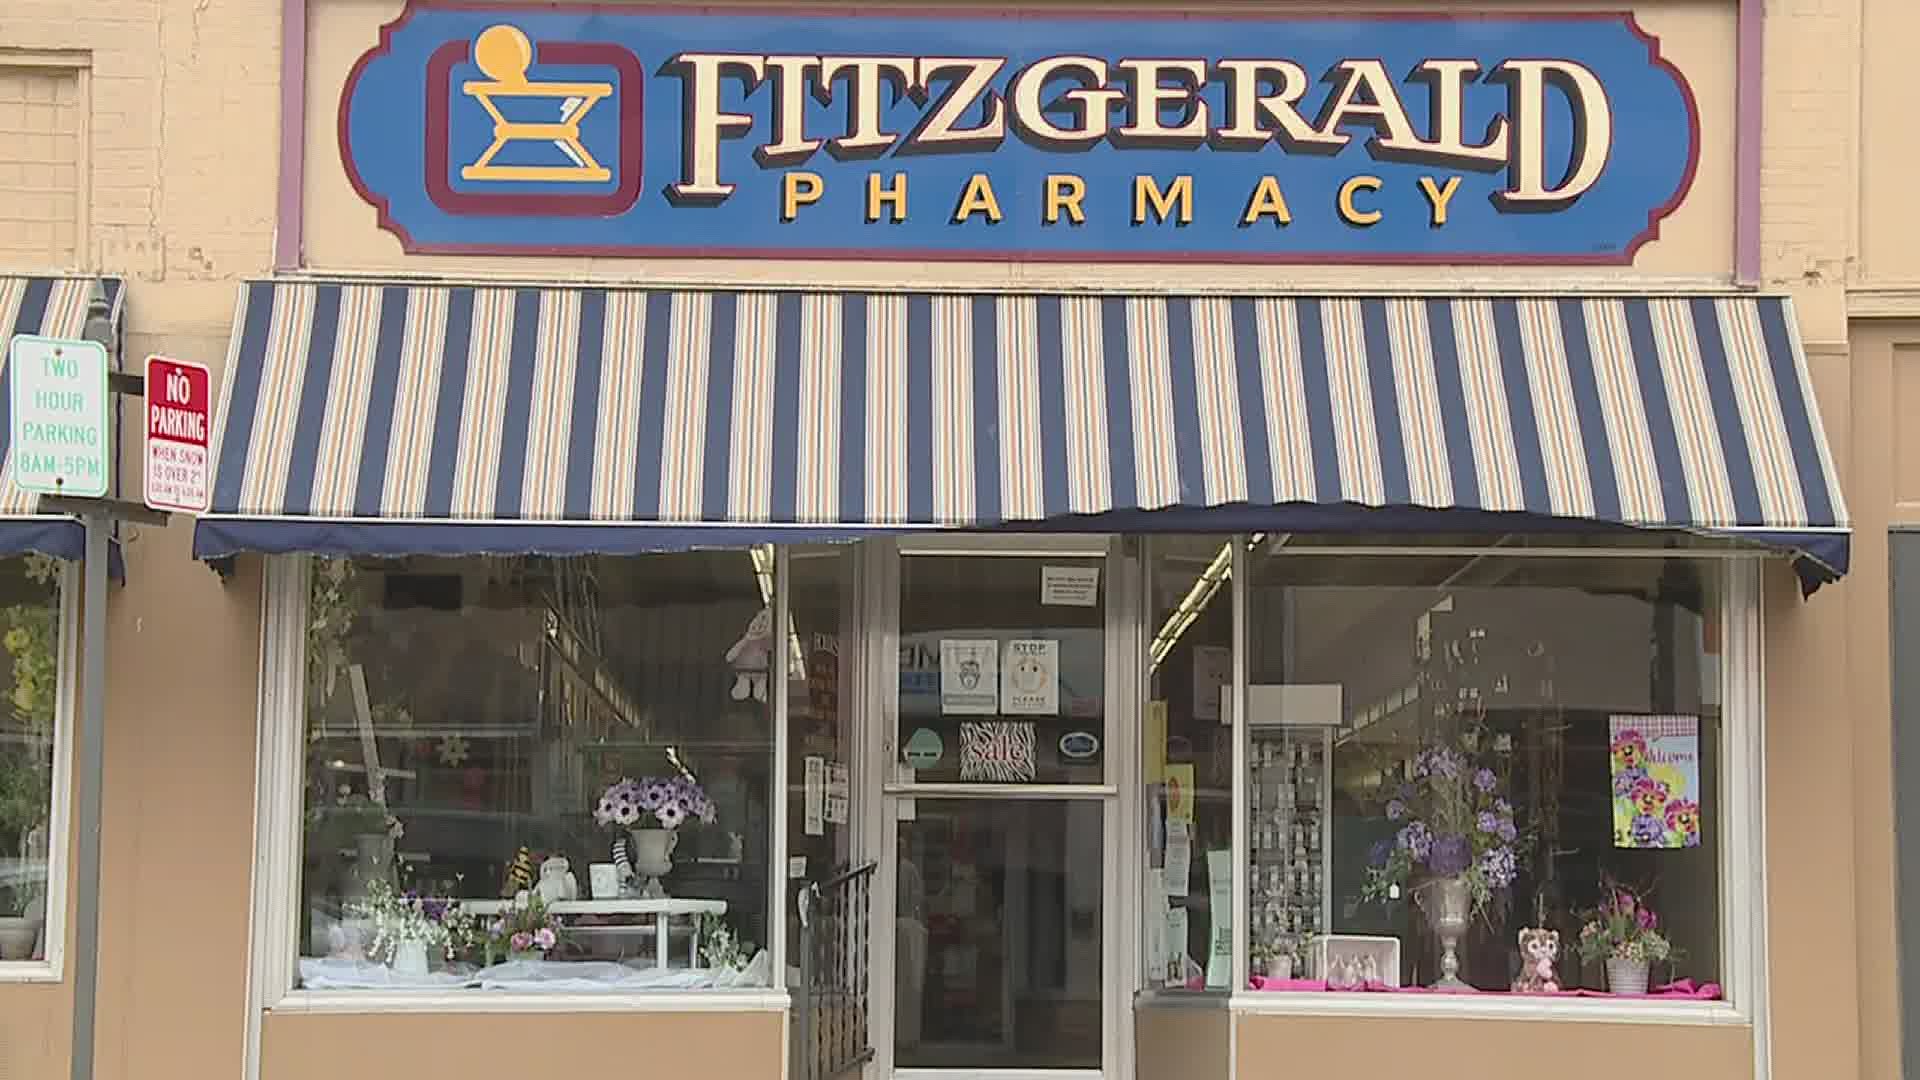 Fitzgerald Pharmacy is the only one in Morrison, and recently started receiving COVID-19 vaccines. They've held four clinics, and Thursday's was the biggest yet.